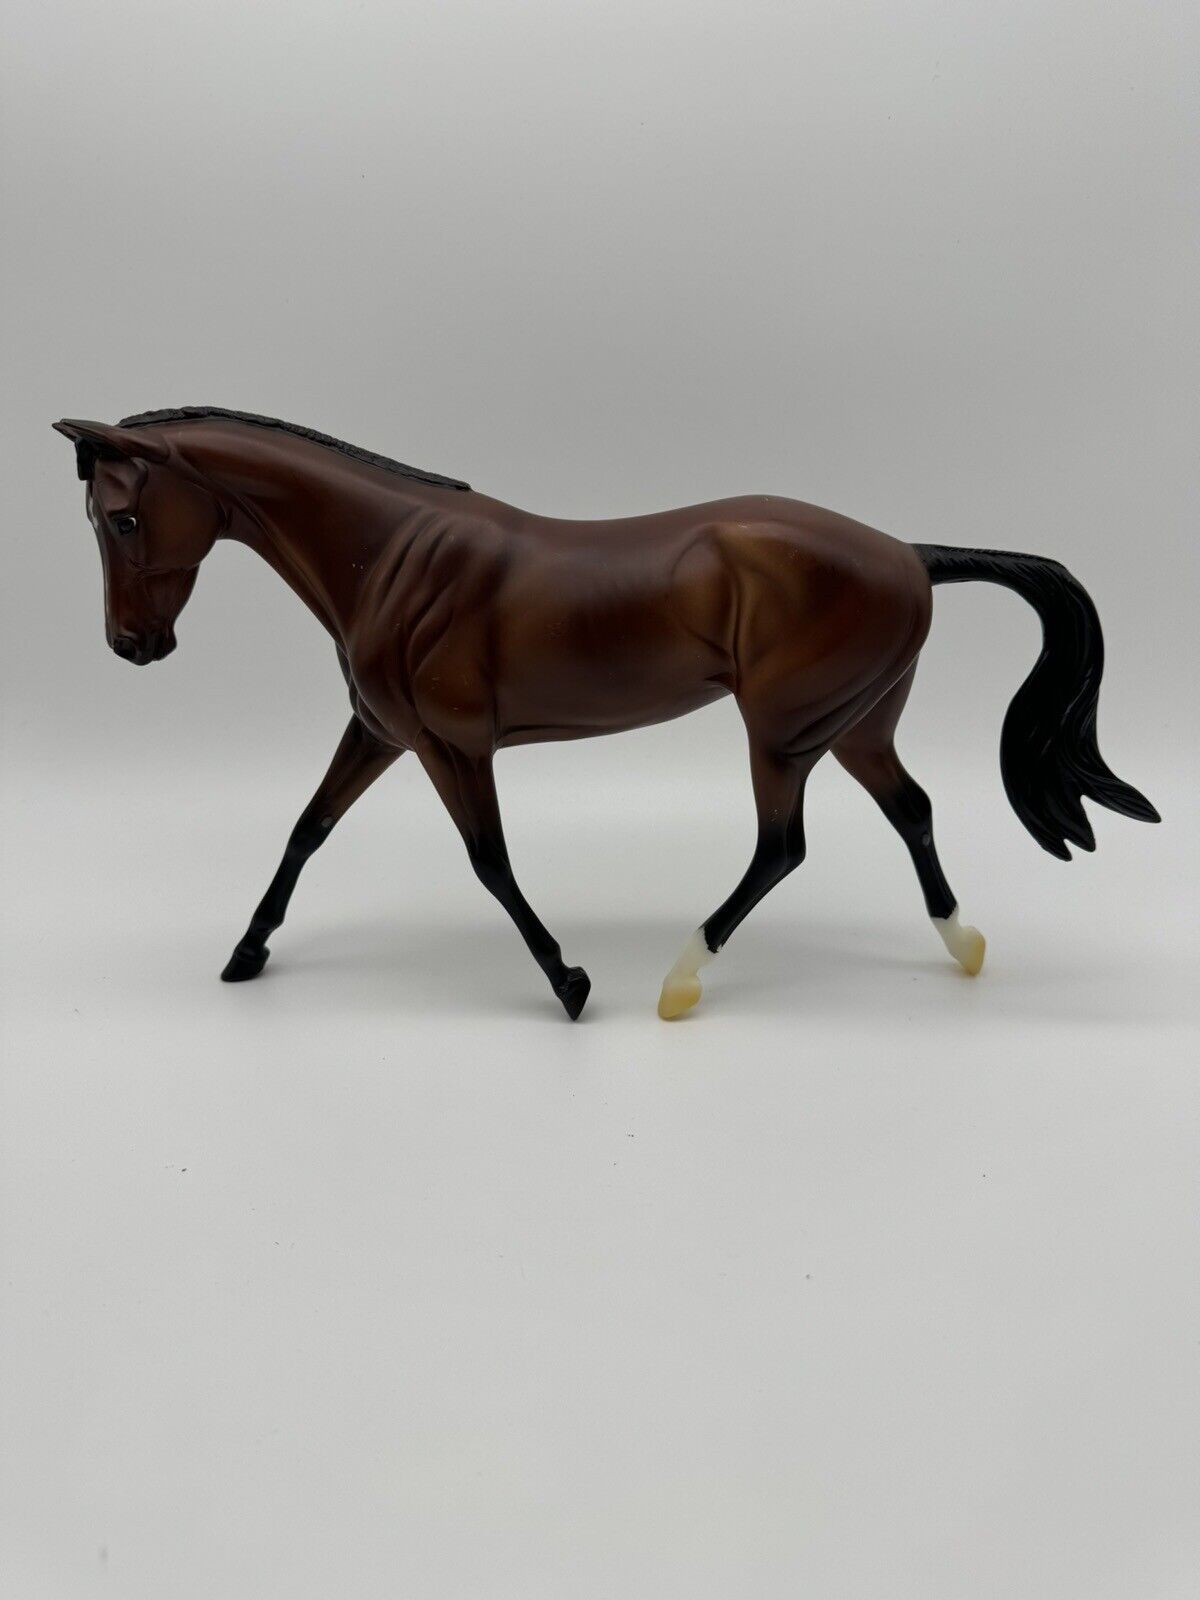 Breyer Protocol #1807 Bay Horse on the Strapless Mold